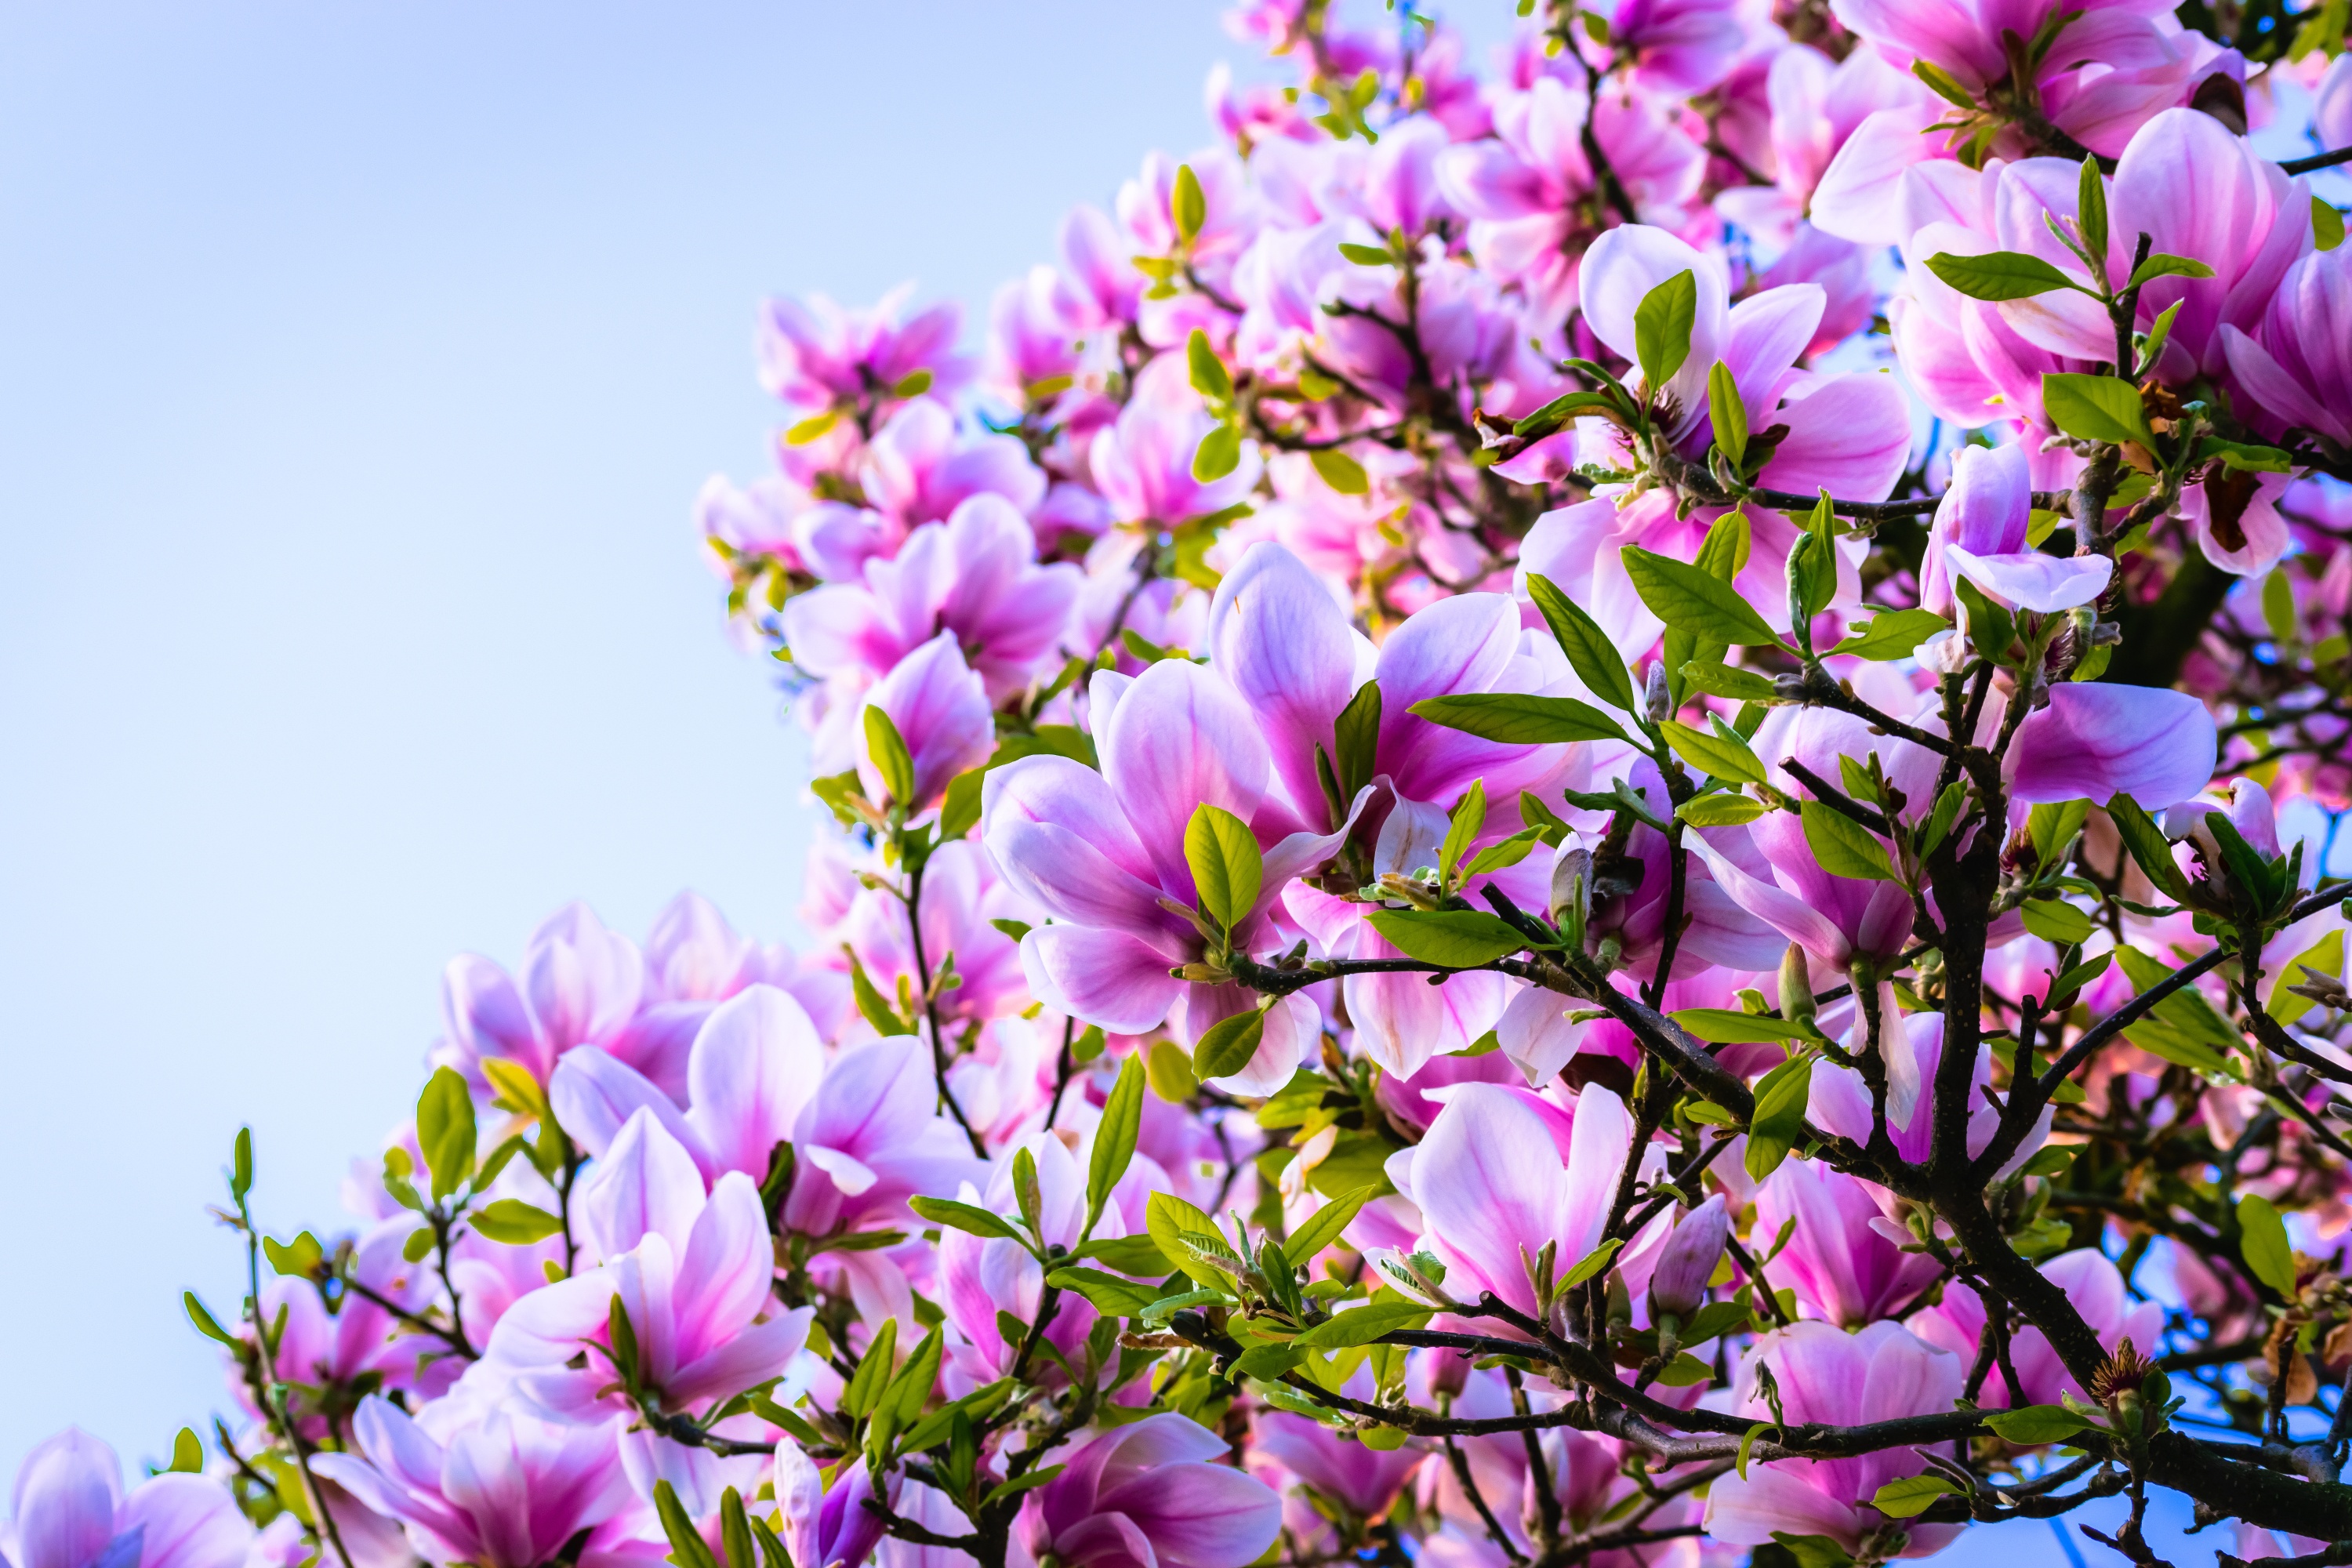 earth, magnolia, branch, flower, nature, pink flower, spring, trees